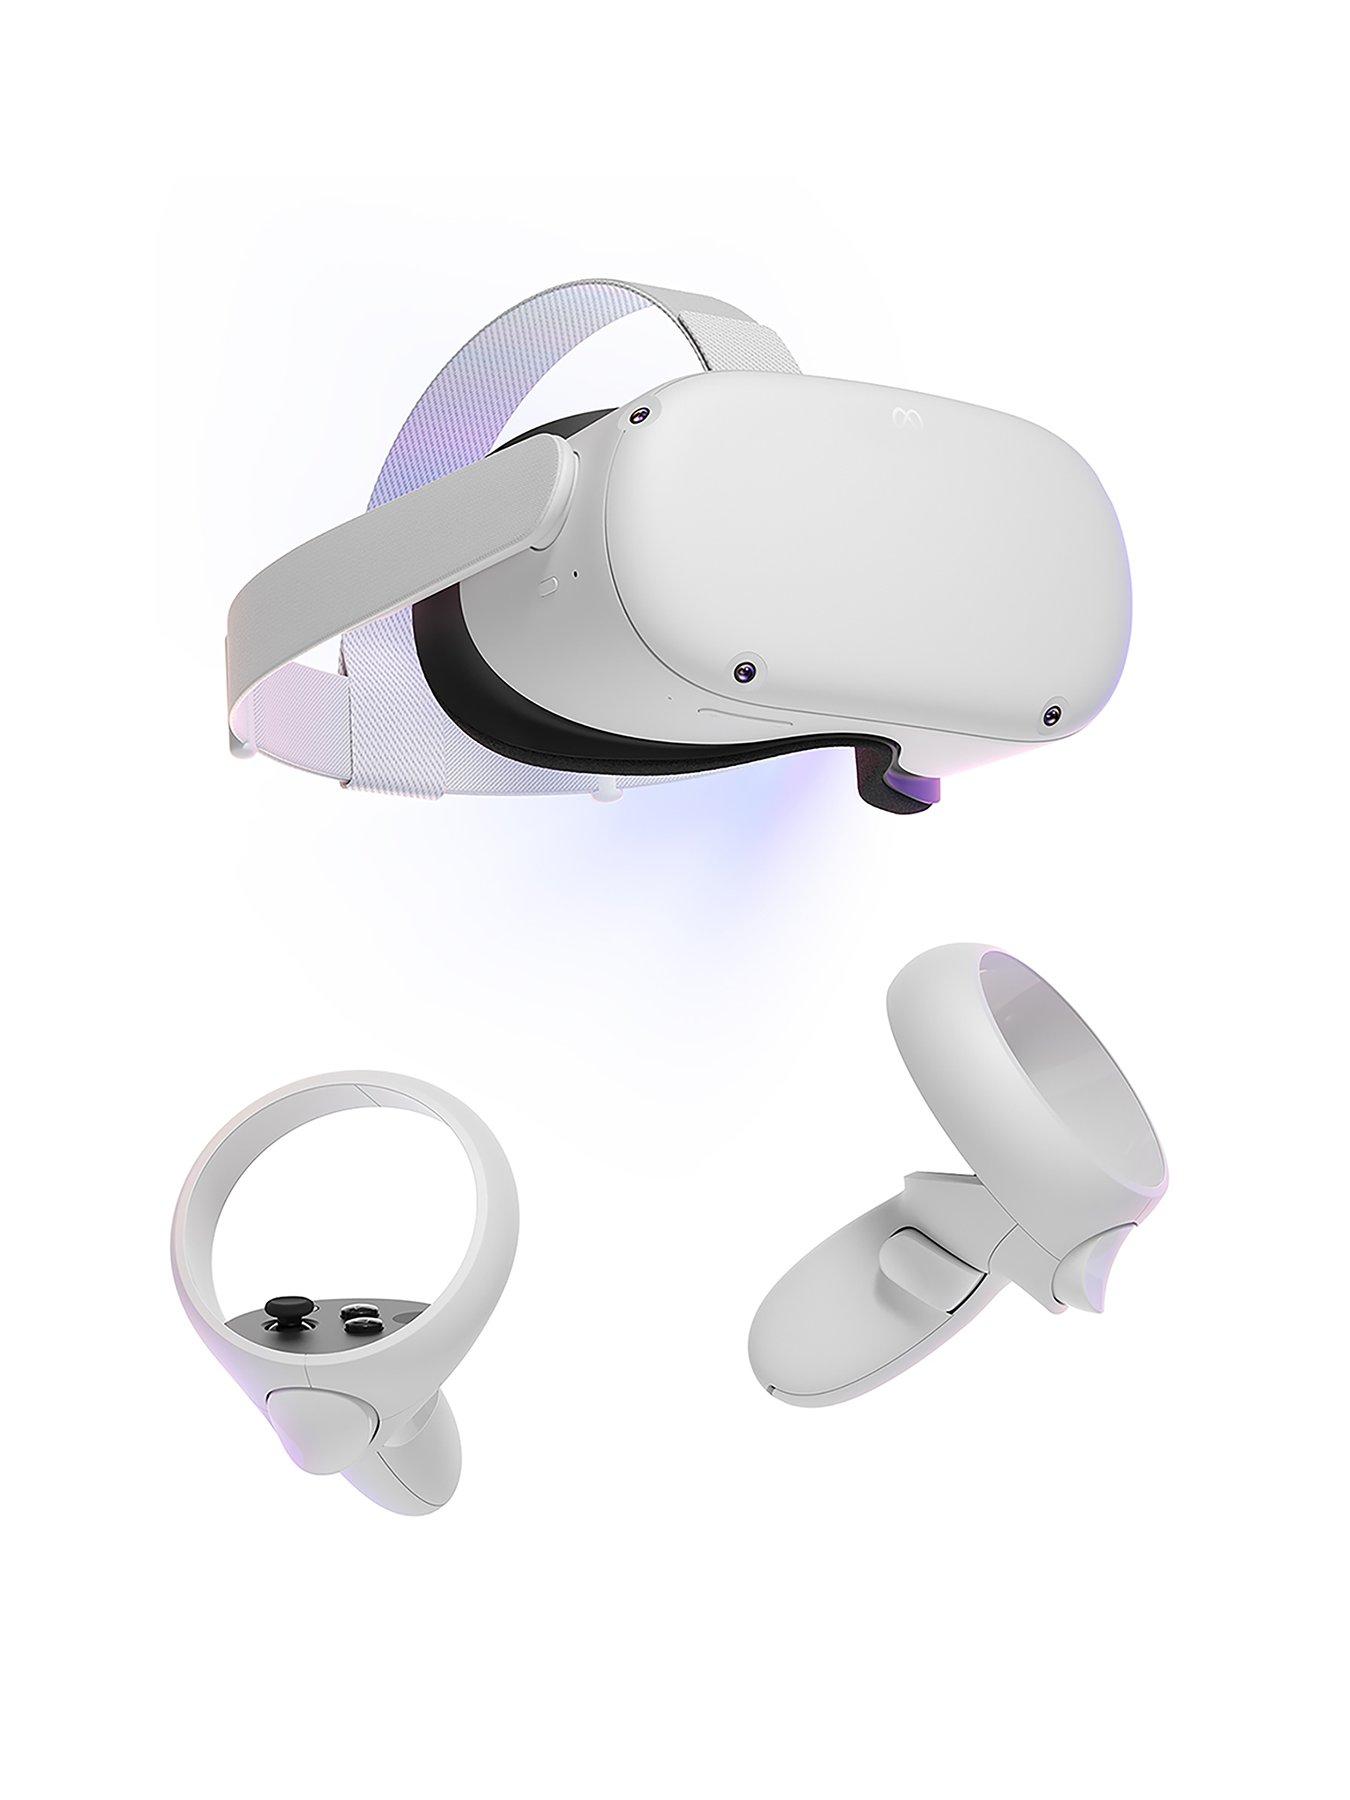 2 256GB, All-in-One VR Headset